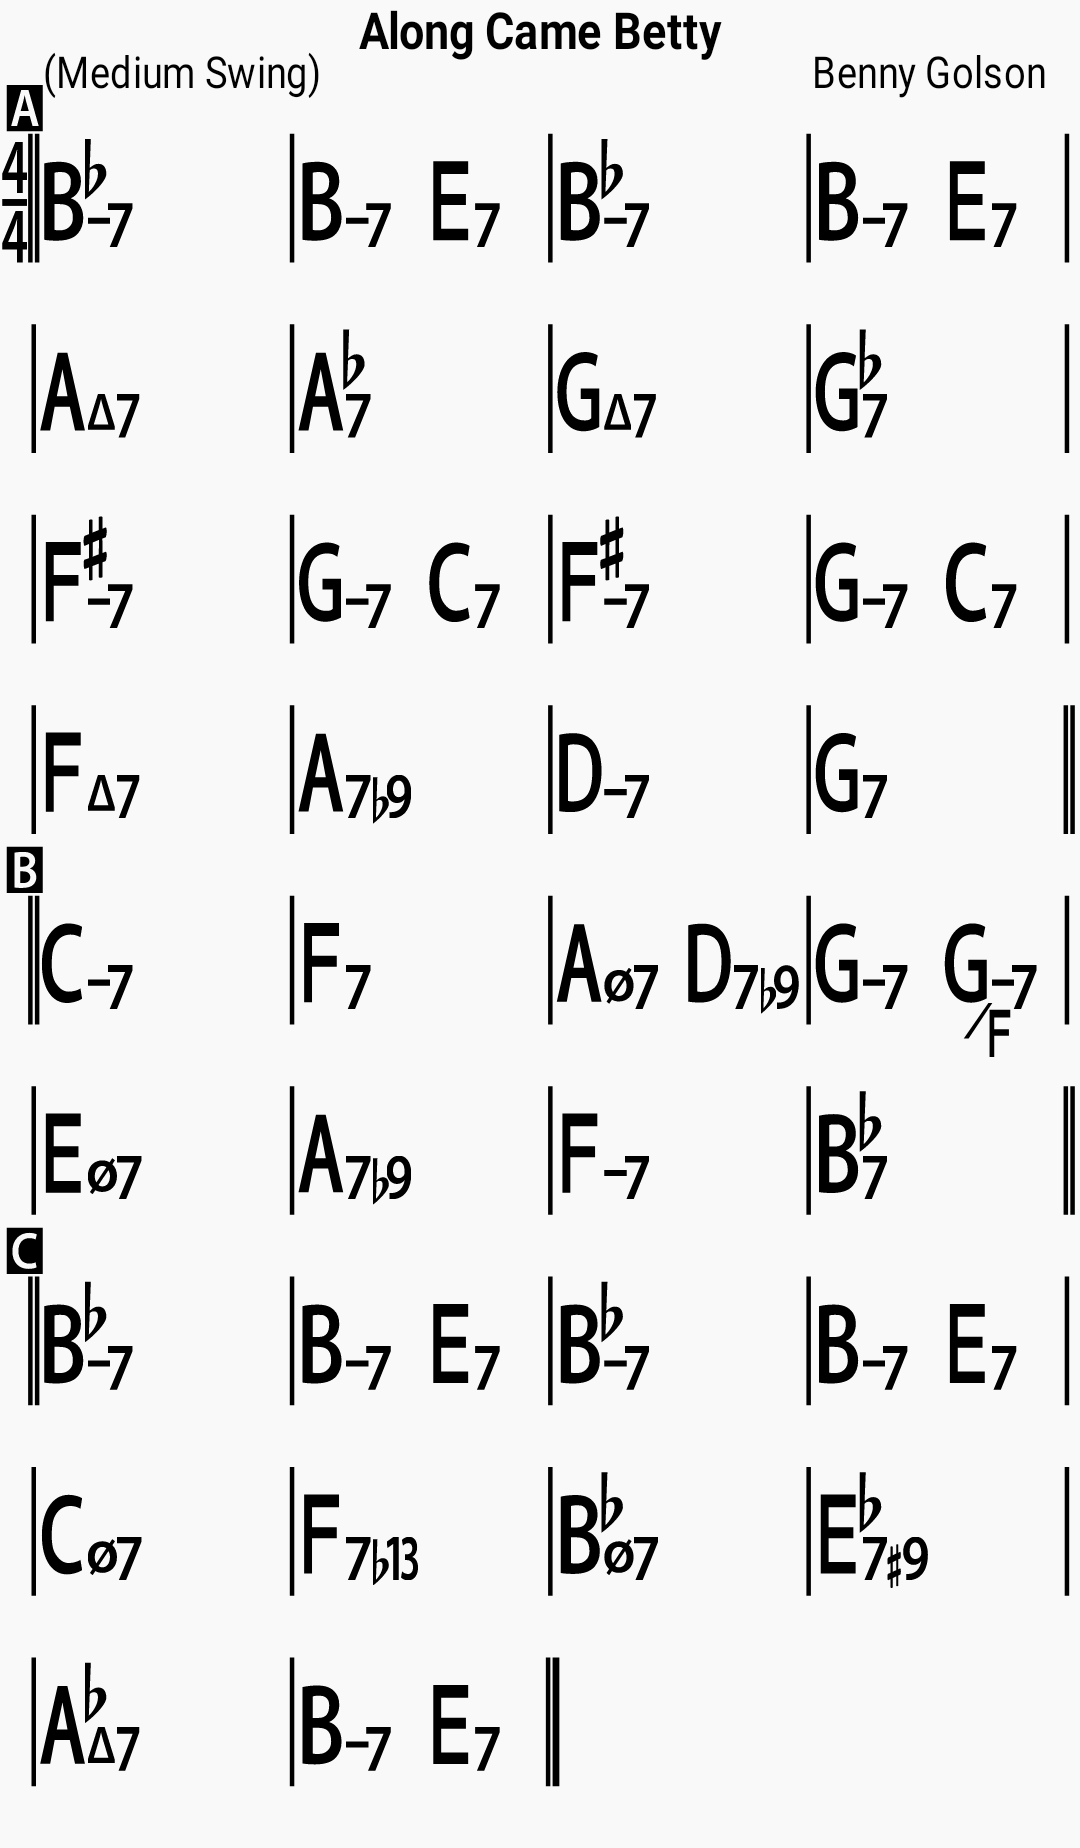 Chord chart for the jazz standard Along Came Betty